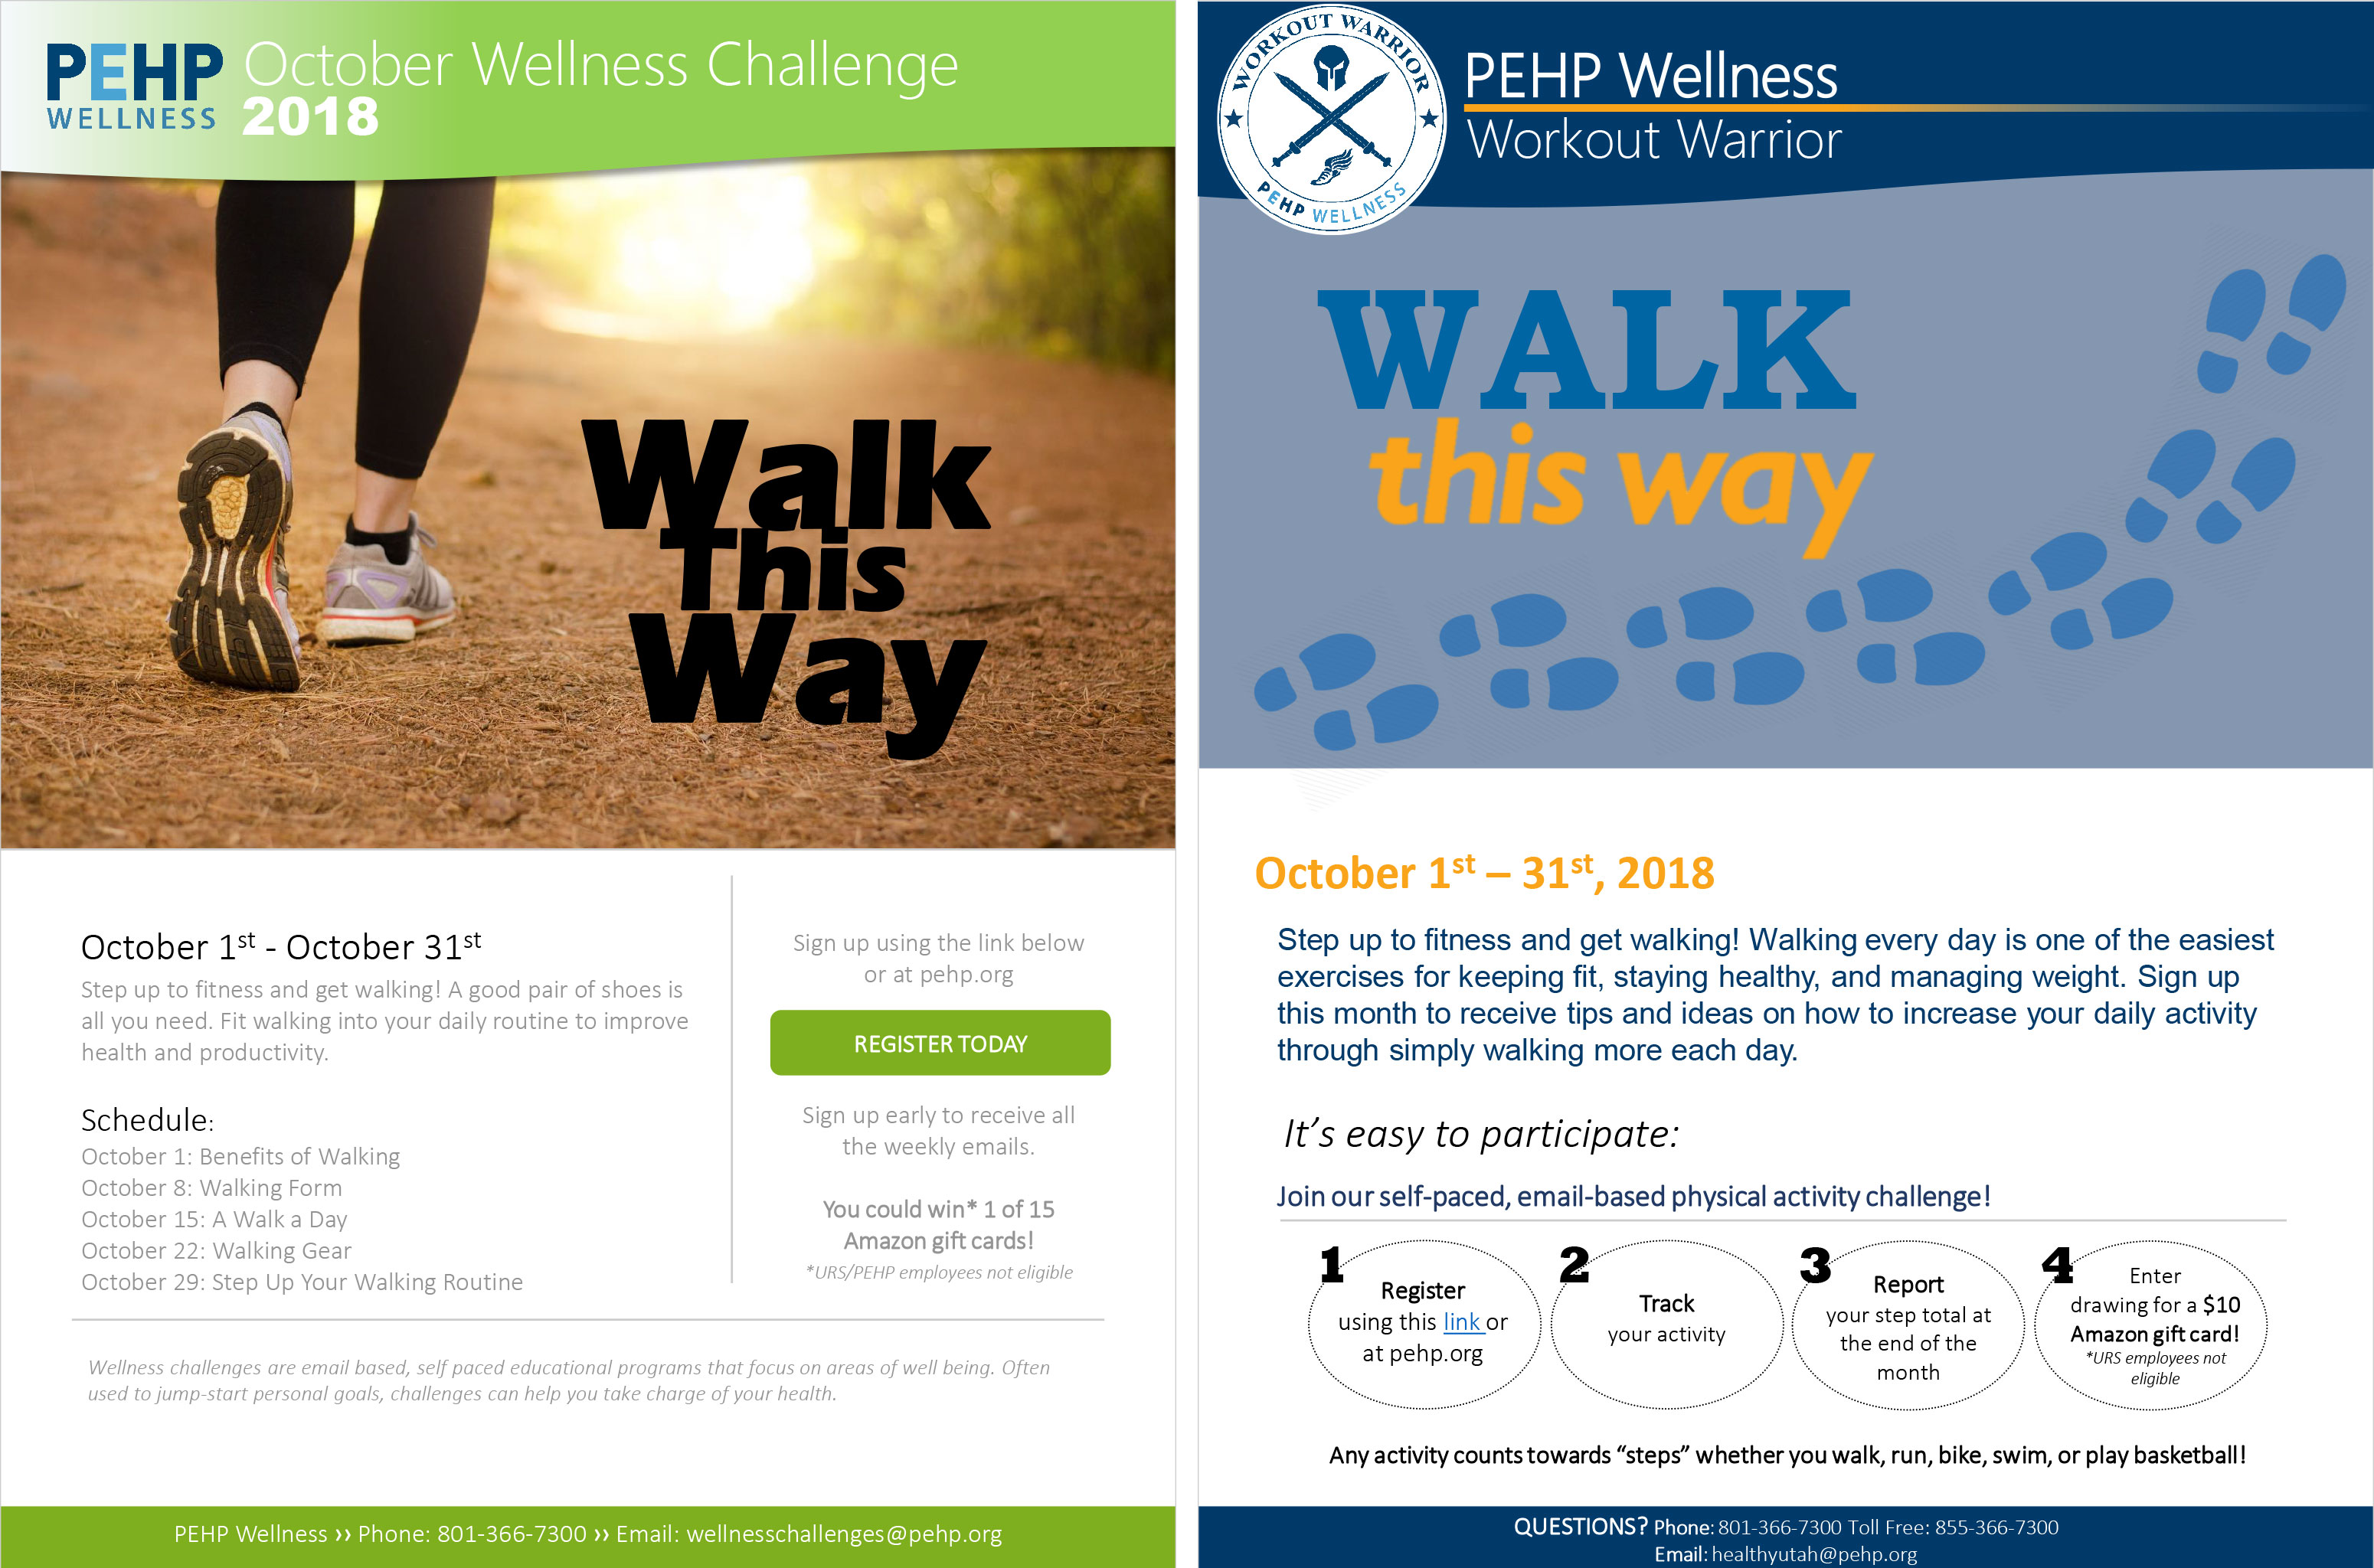 Walk This Way Wellness Challenge & Workout Warrior Flyers. See PDF for full text.